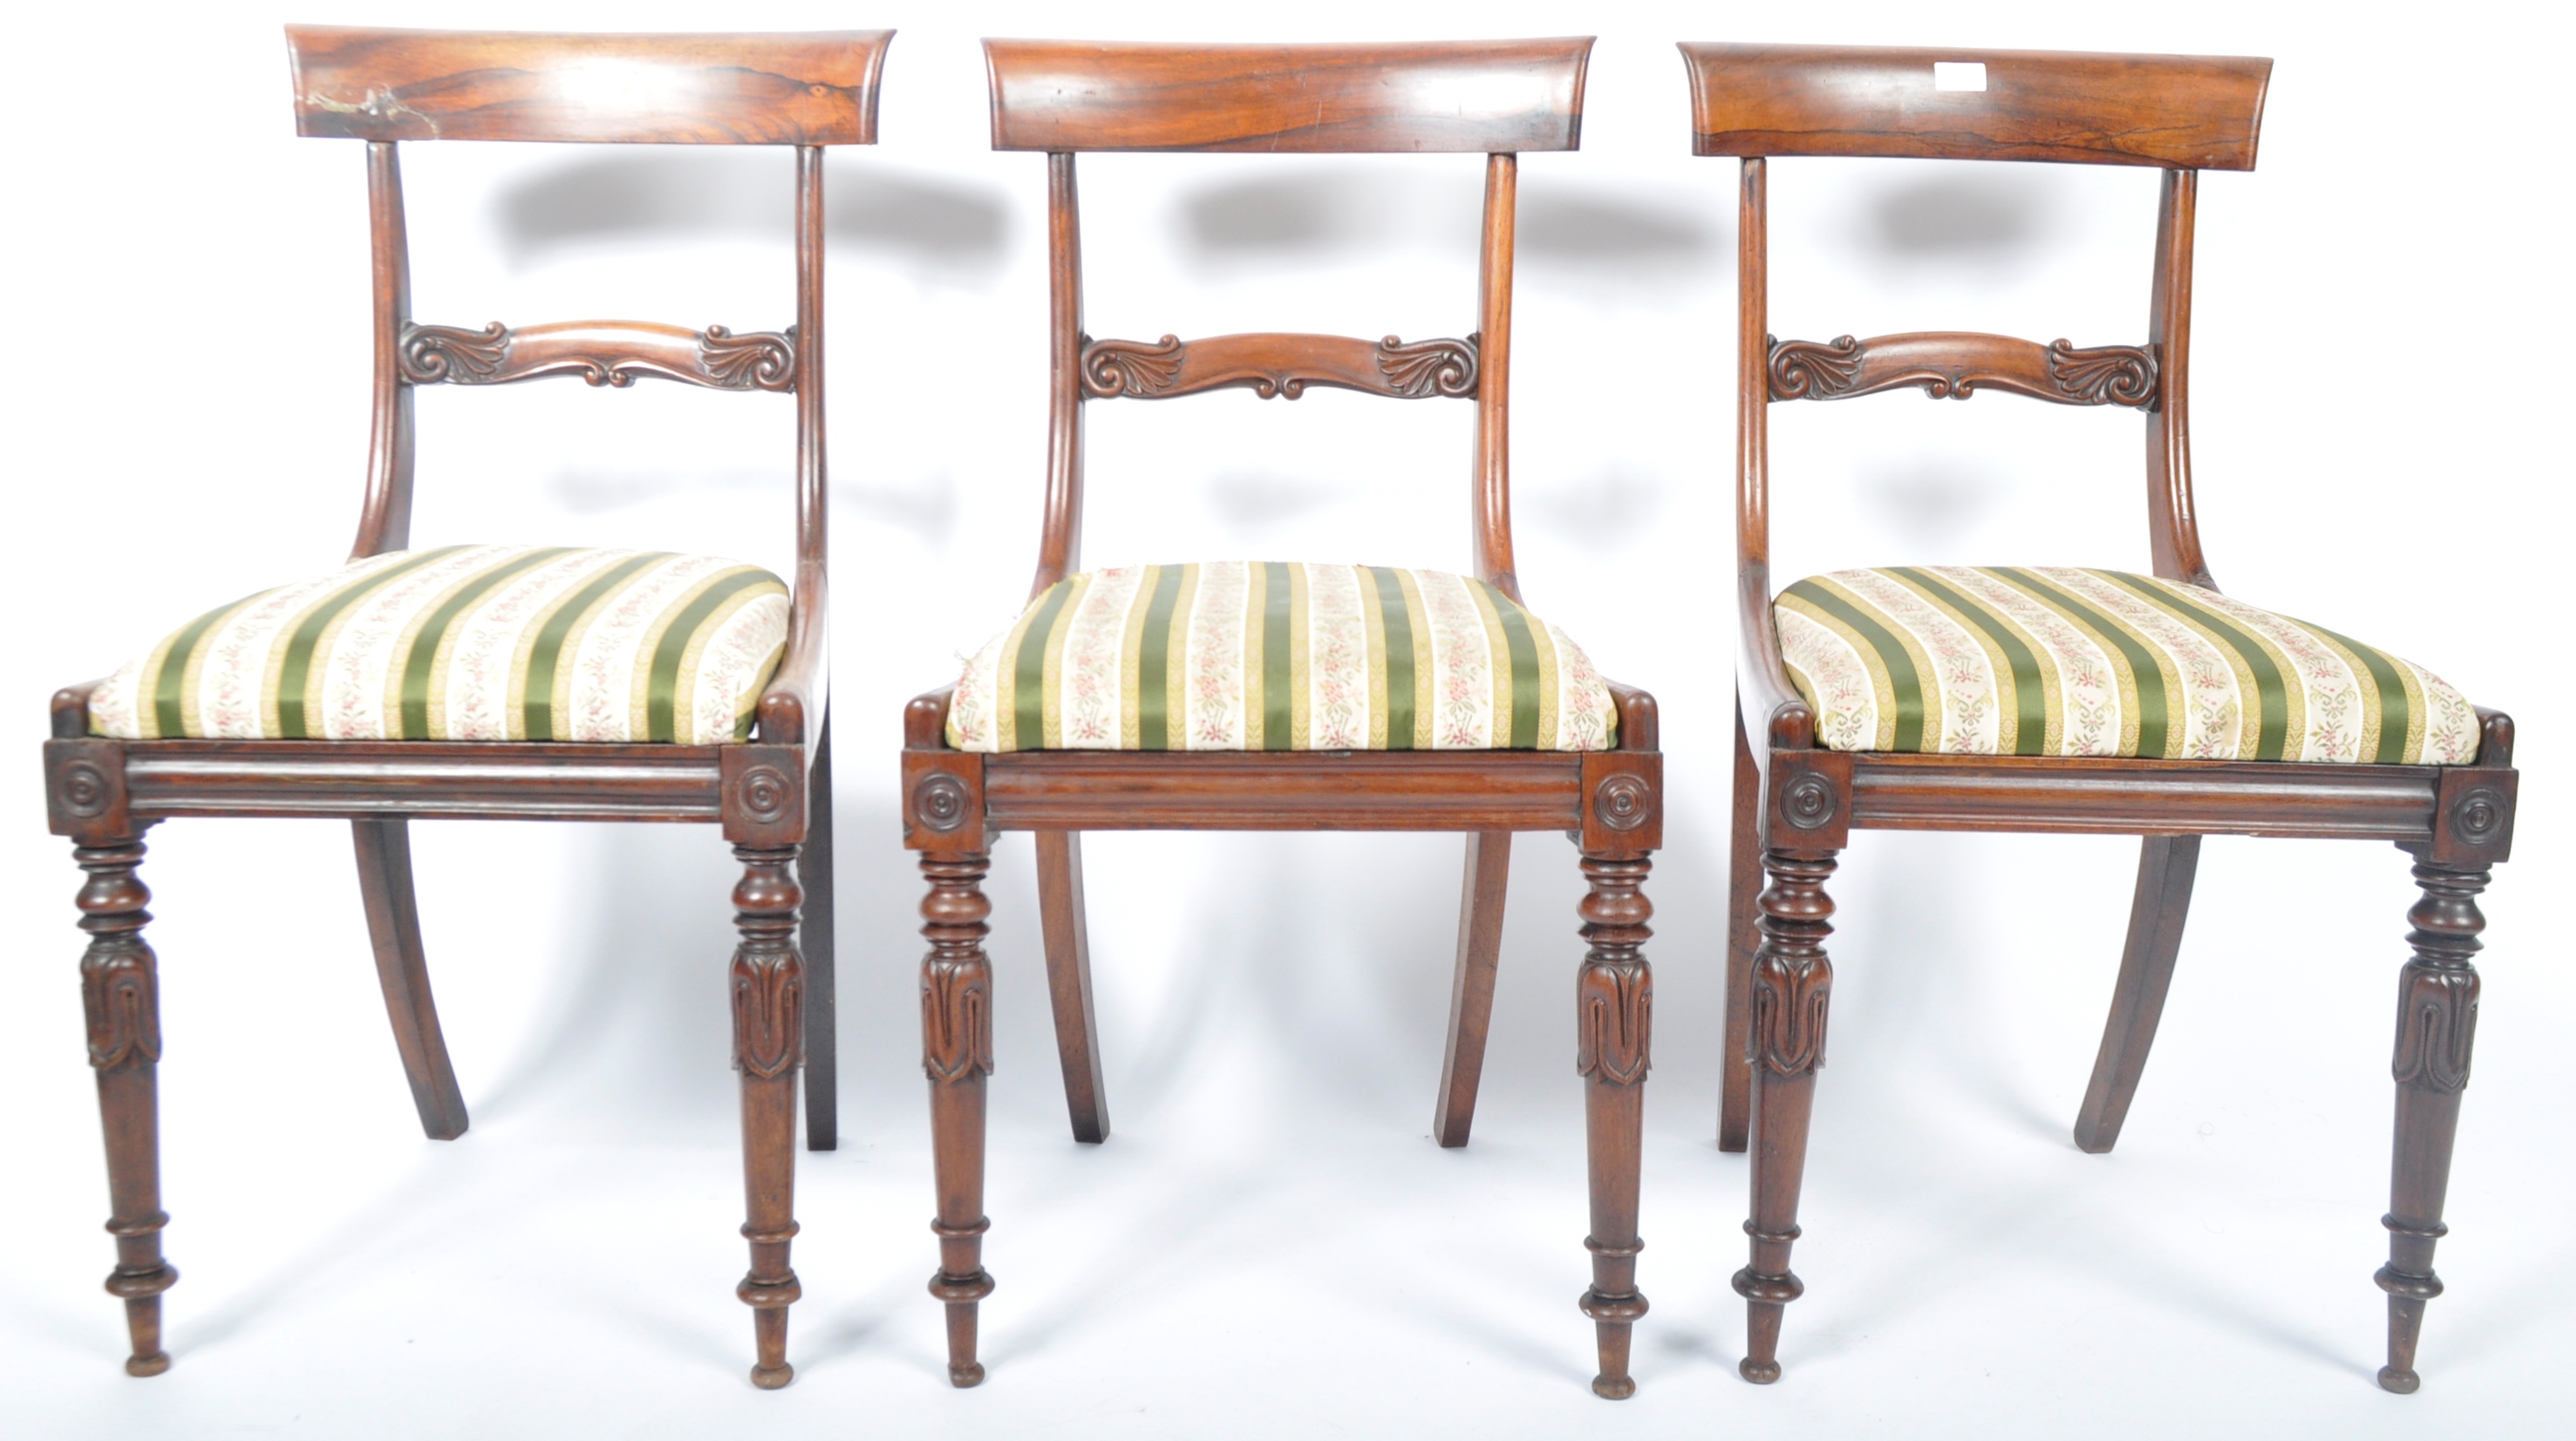 SET OF SIX ANTIQUE ROSEWOOD DINING CHAIRS IN THE GILLOWS STYLE - Image 5 of 12